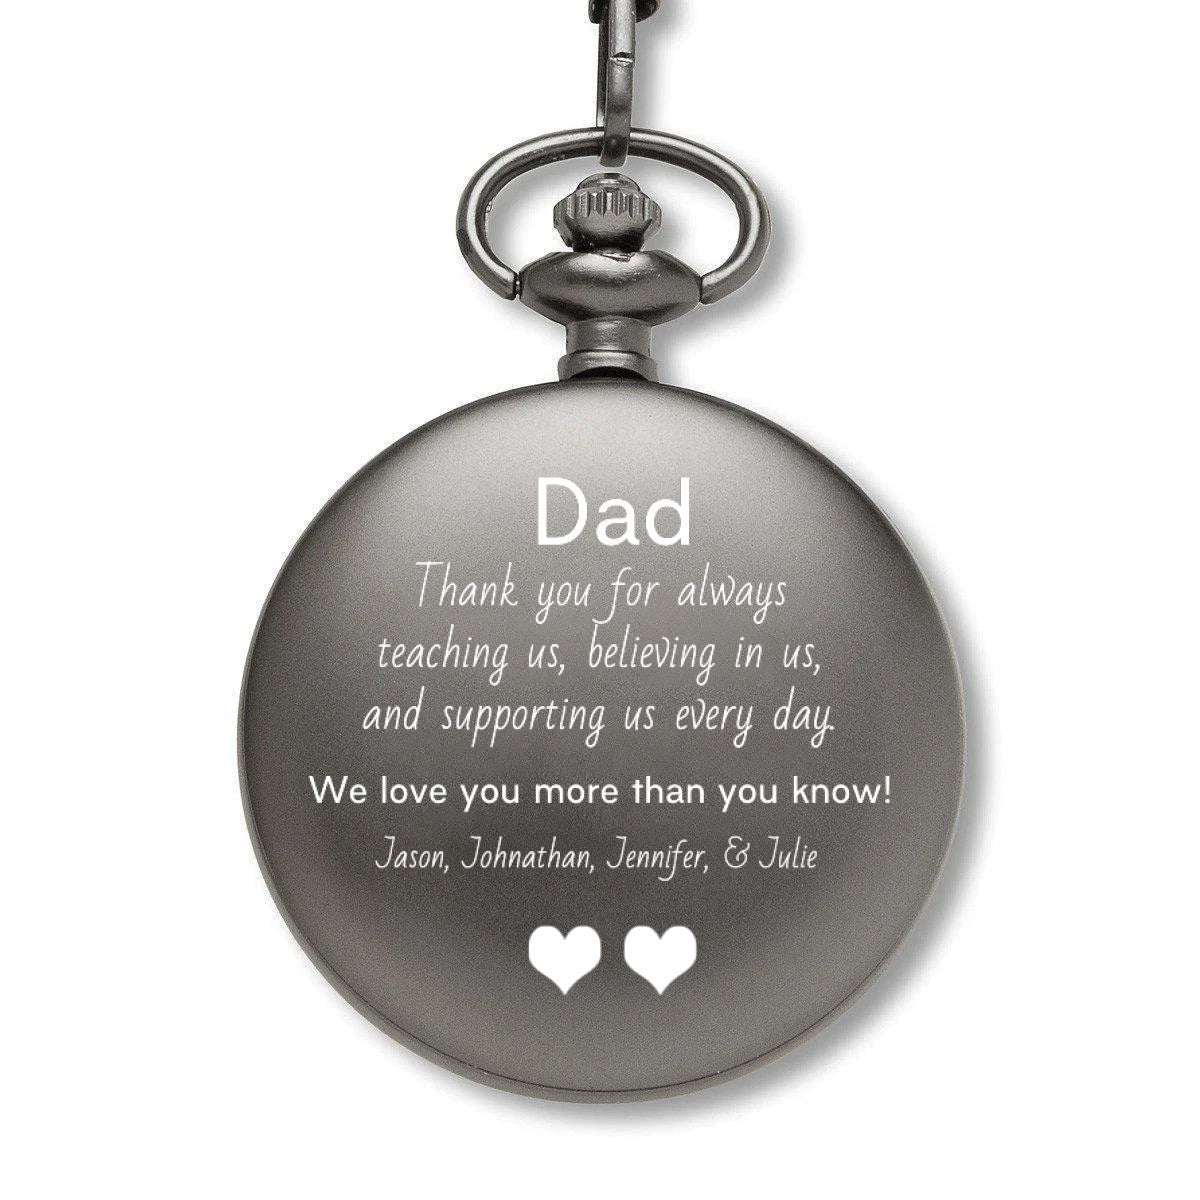 Personalized - Thank You Dad Open Face Pocket Watch